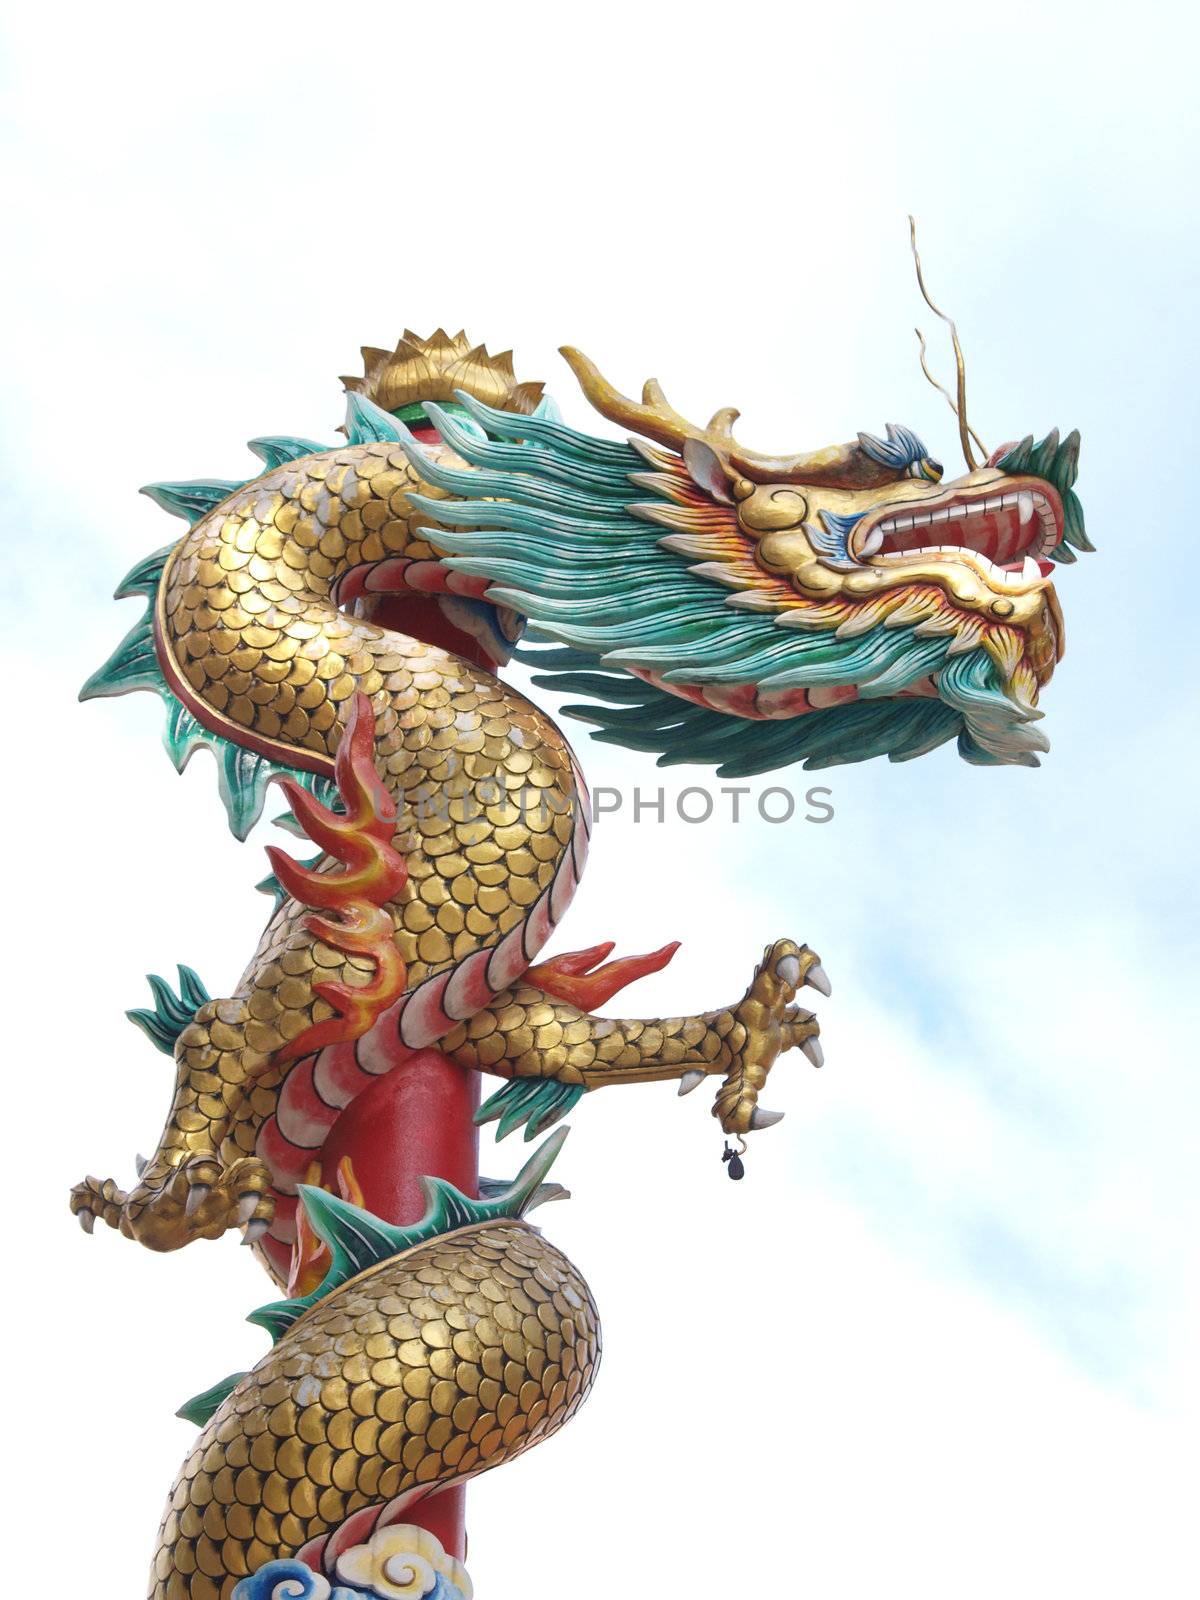 Chinese style dragon statue by jakgree